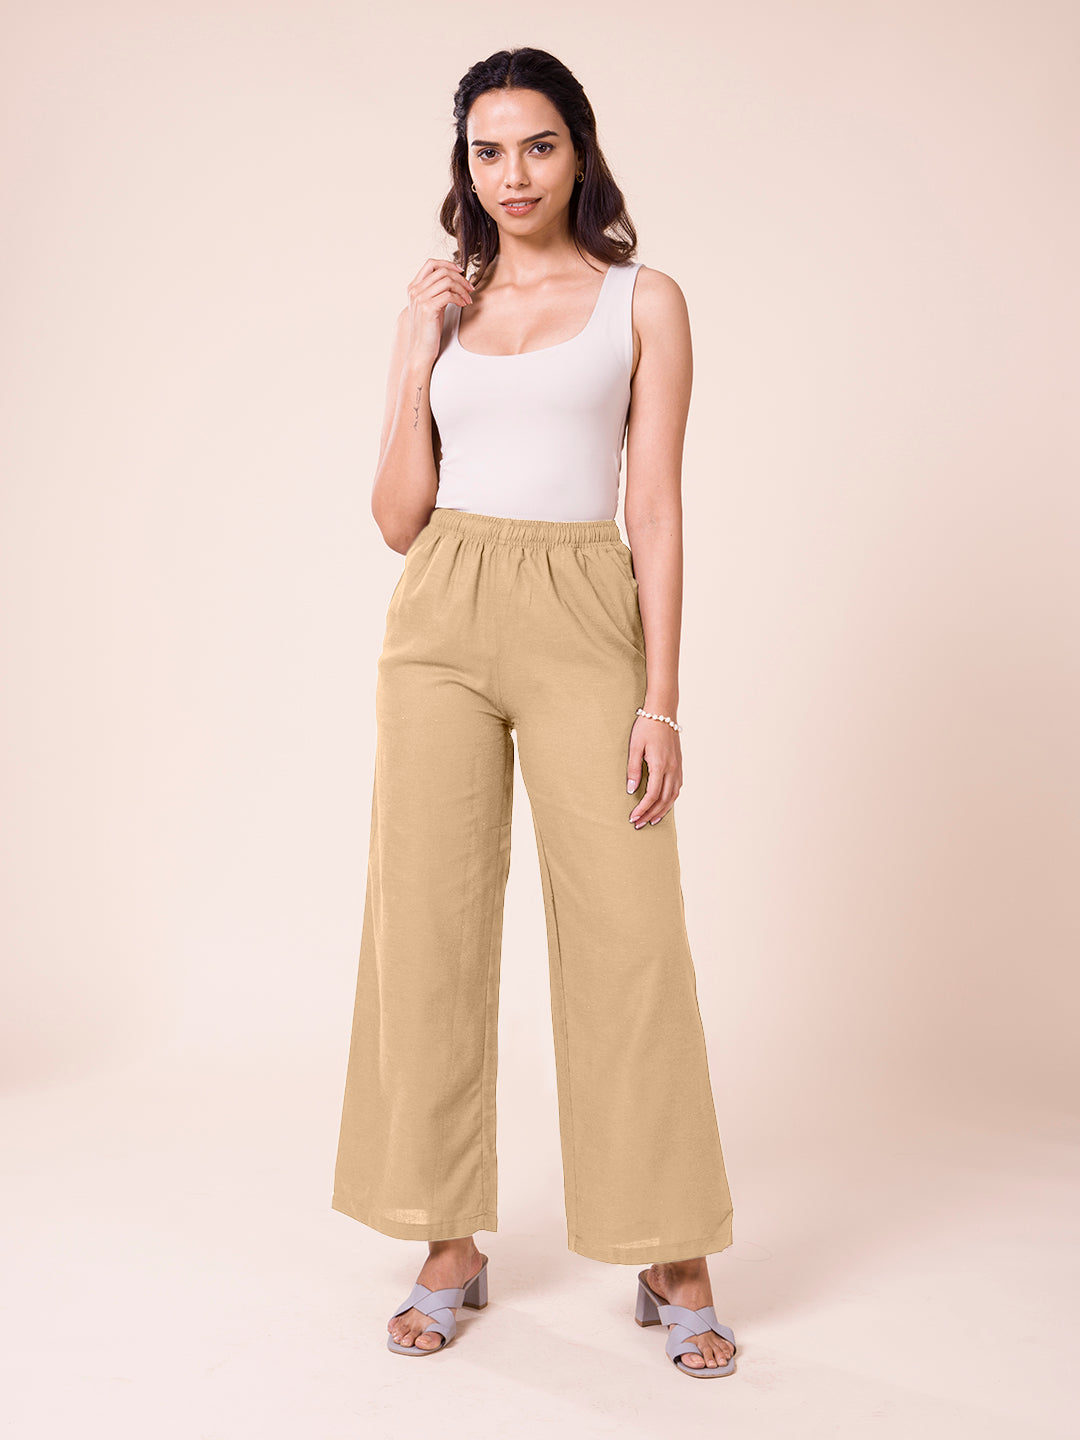 Latest Style Trend – How to wear Palazzo Pants | Touch18